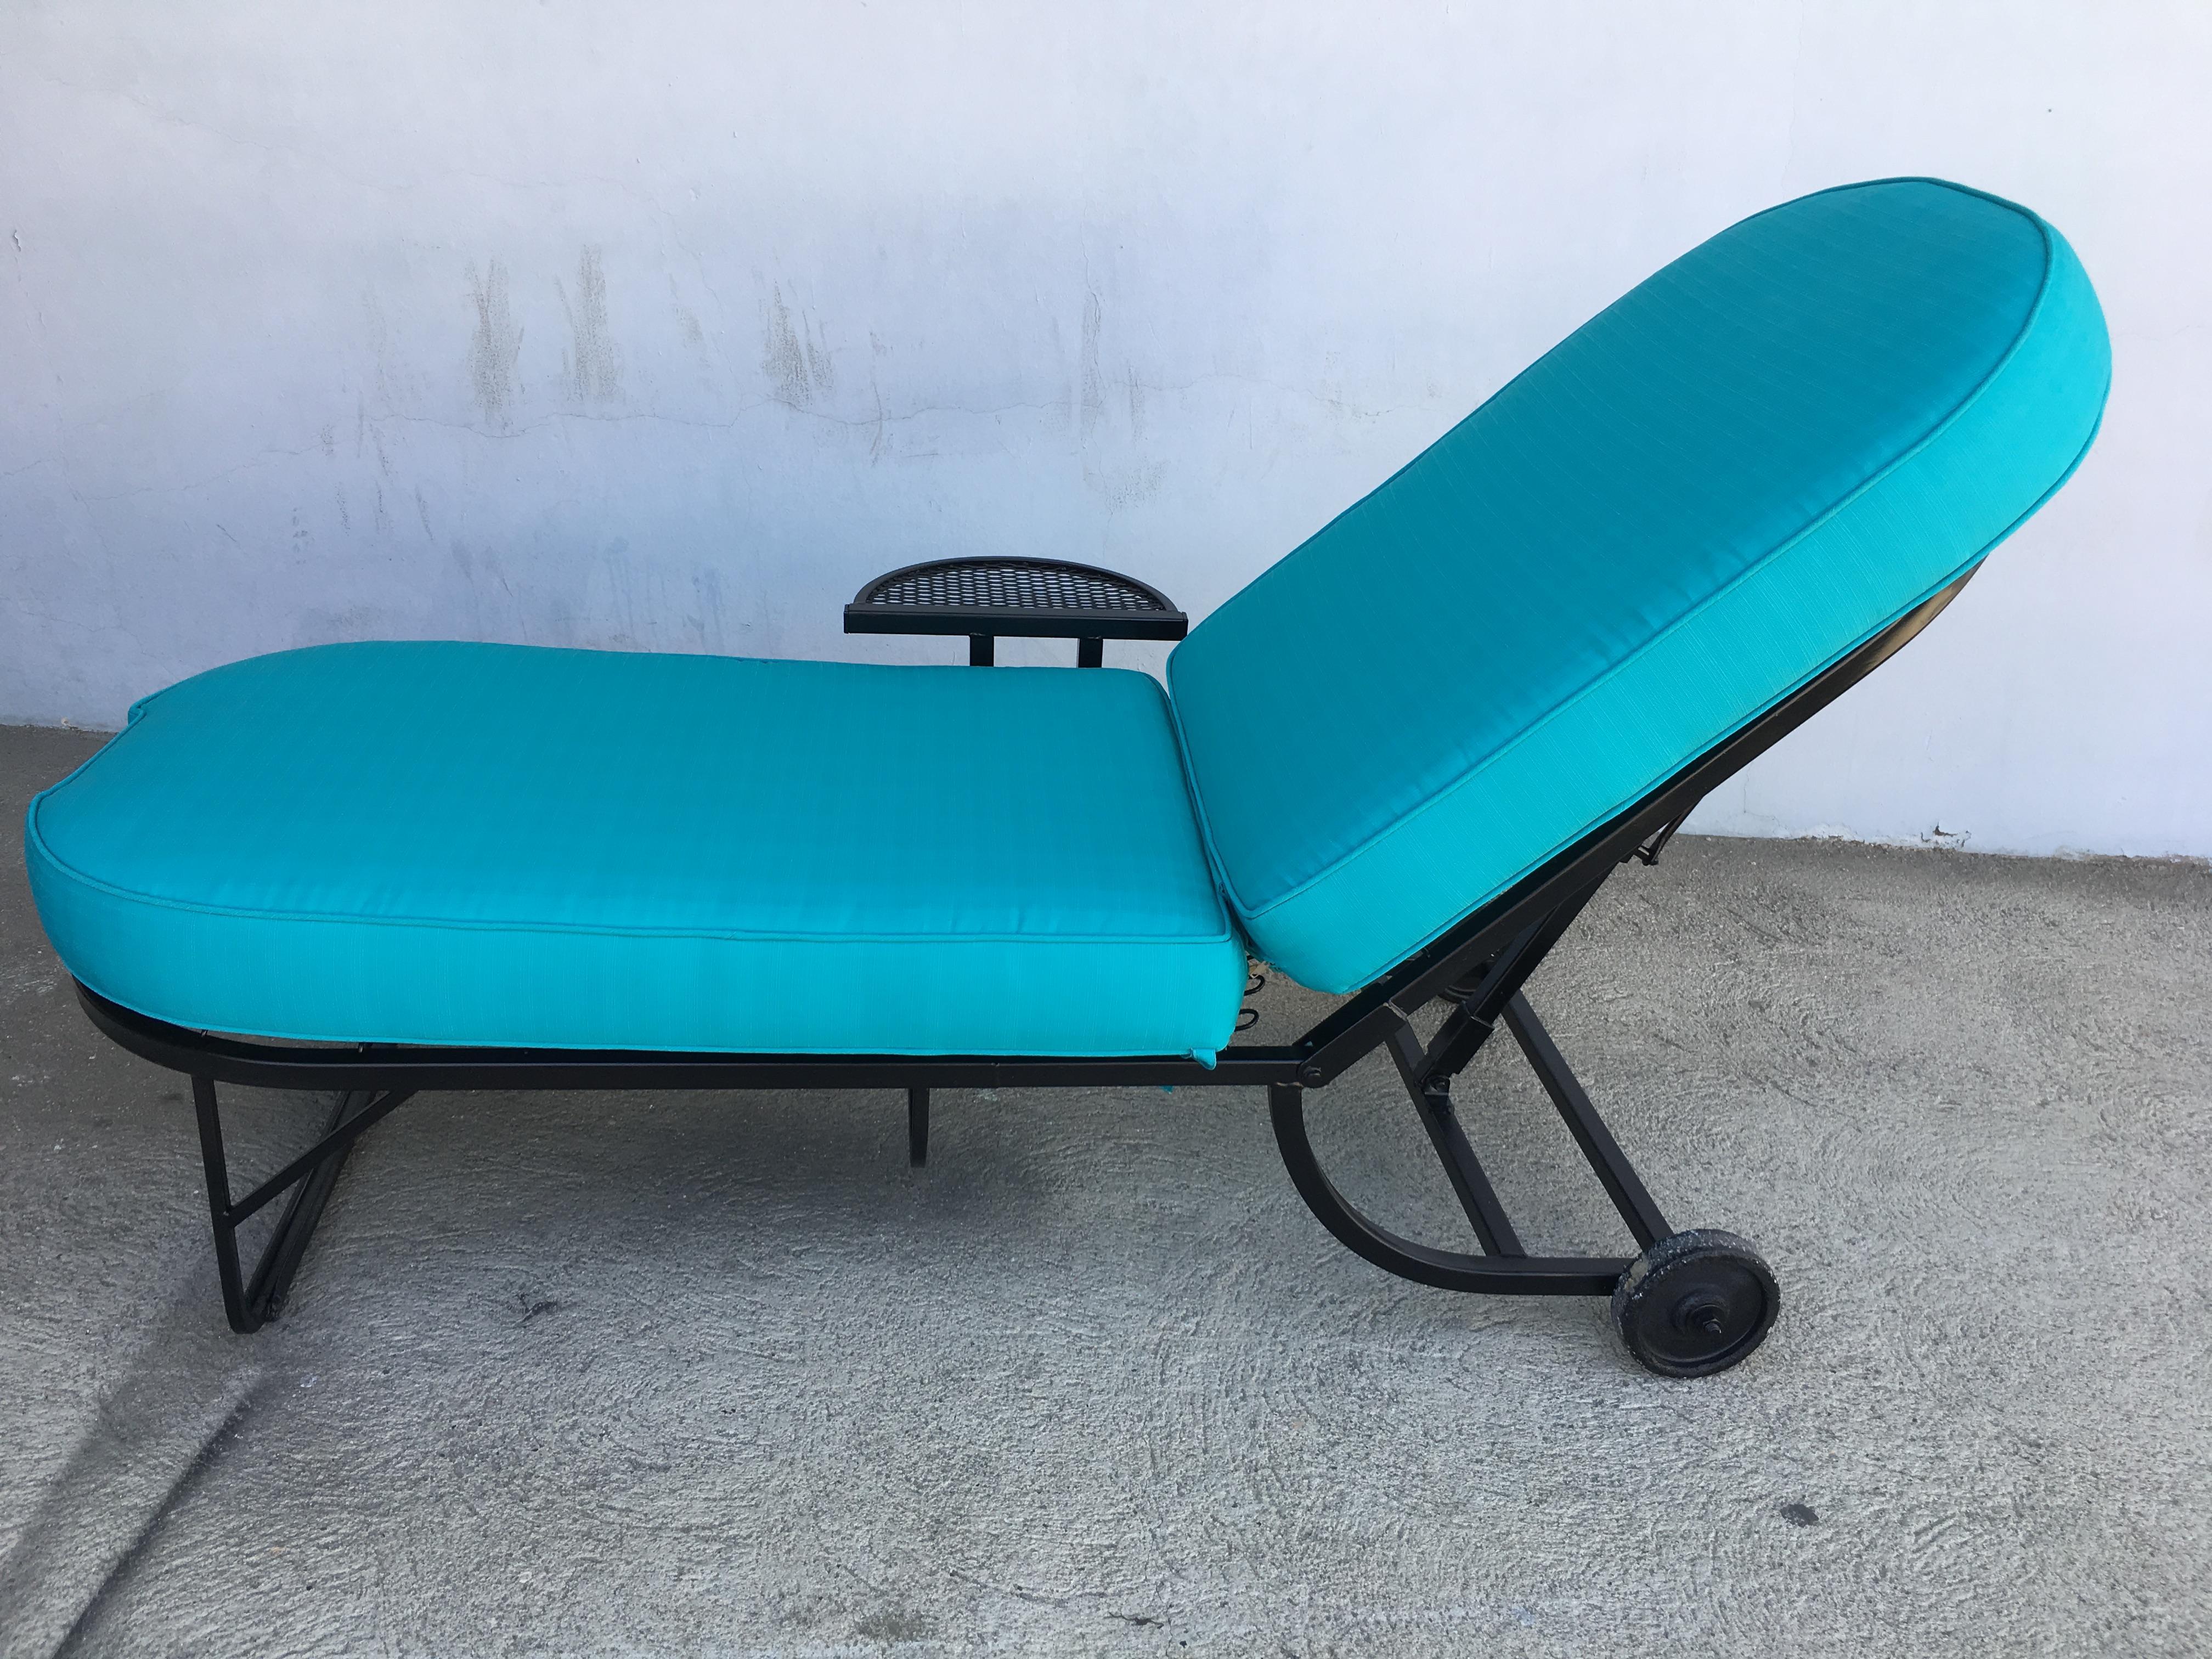 Black steel tubular outdoor / patio chaise lounge, produced in 1960 by the Woodard Furniture Company. This comfortable and stylish vintage chaise lounge features a fully adjustable reclining back and back wheels for easy moving. The modern oval